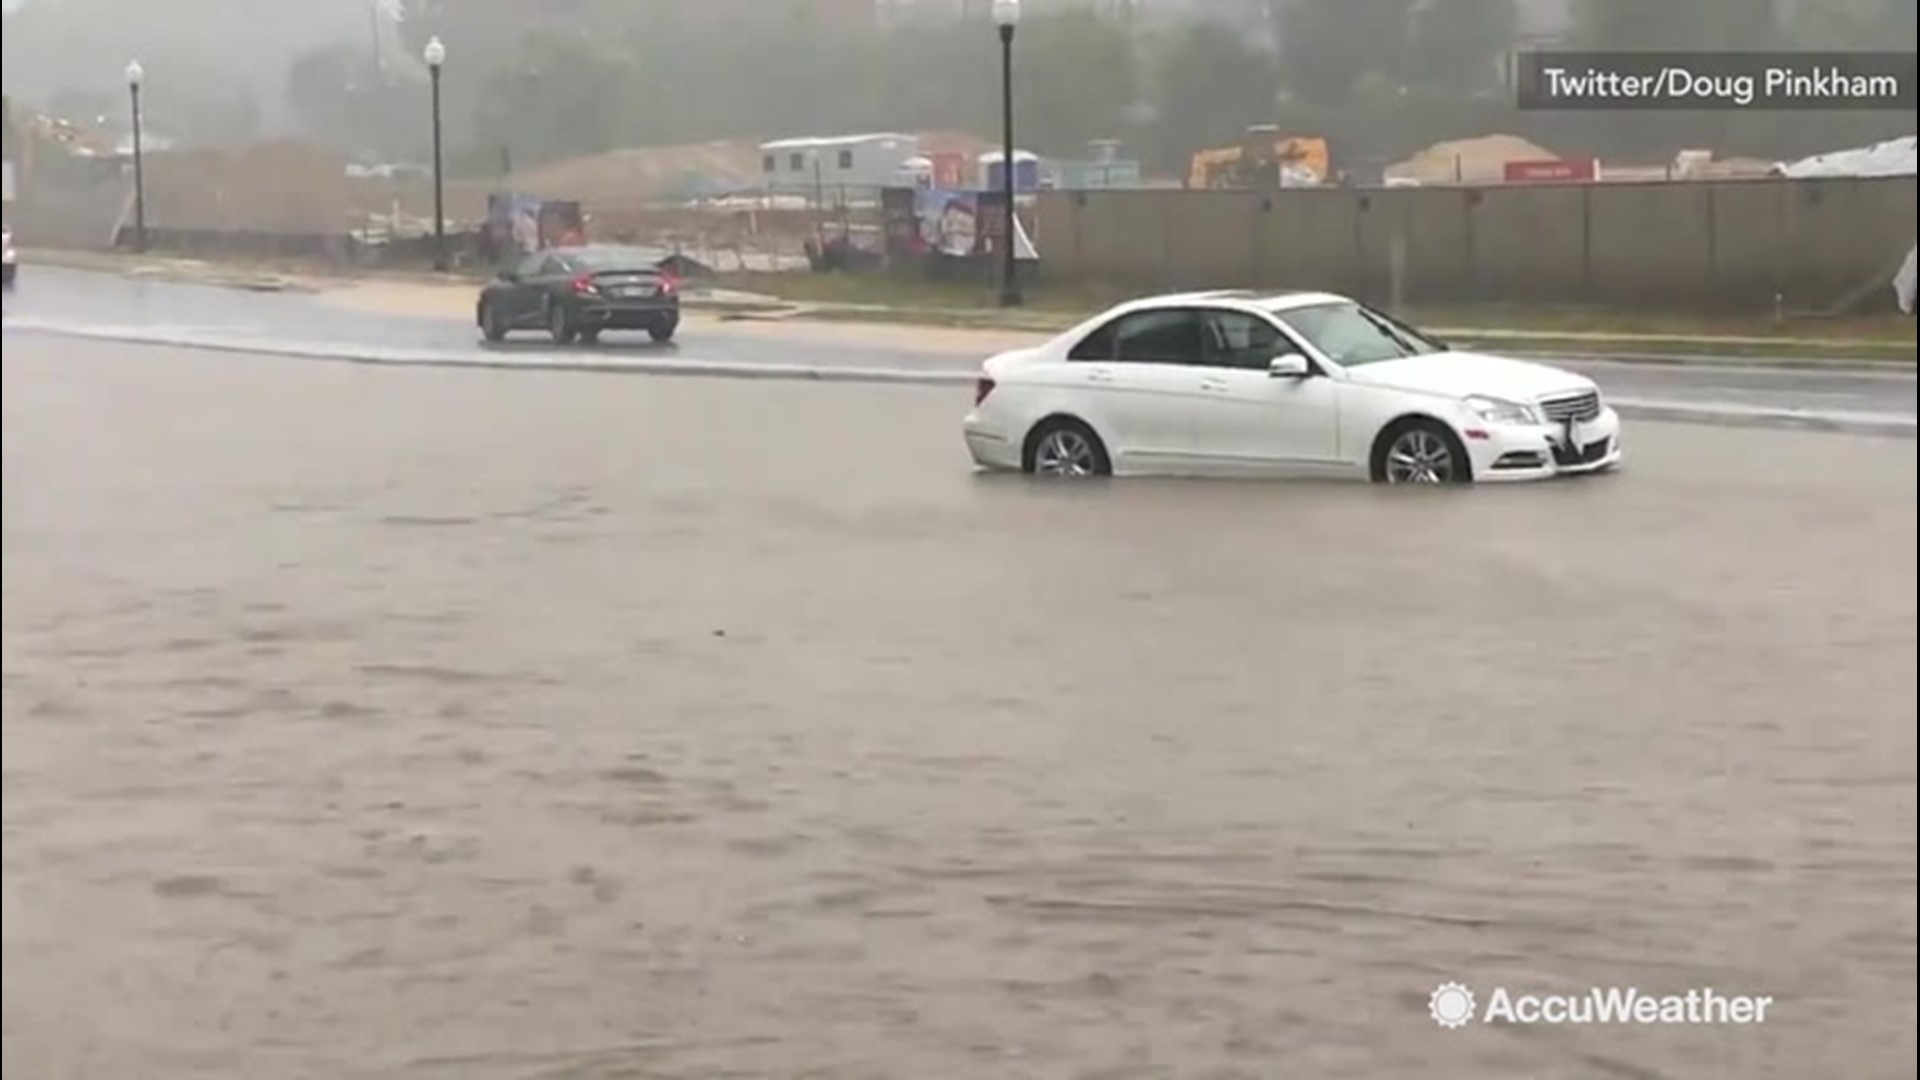 Severe rainfall left many of the streets in Fairfax, Virginia, completely inundated on Aug. 15. Multiple drivers can be seen risking their cars by crossing through the floodwaters.